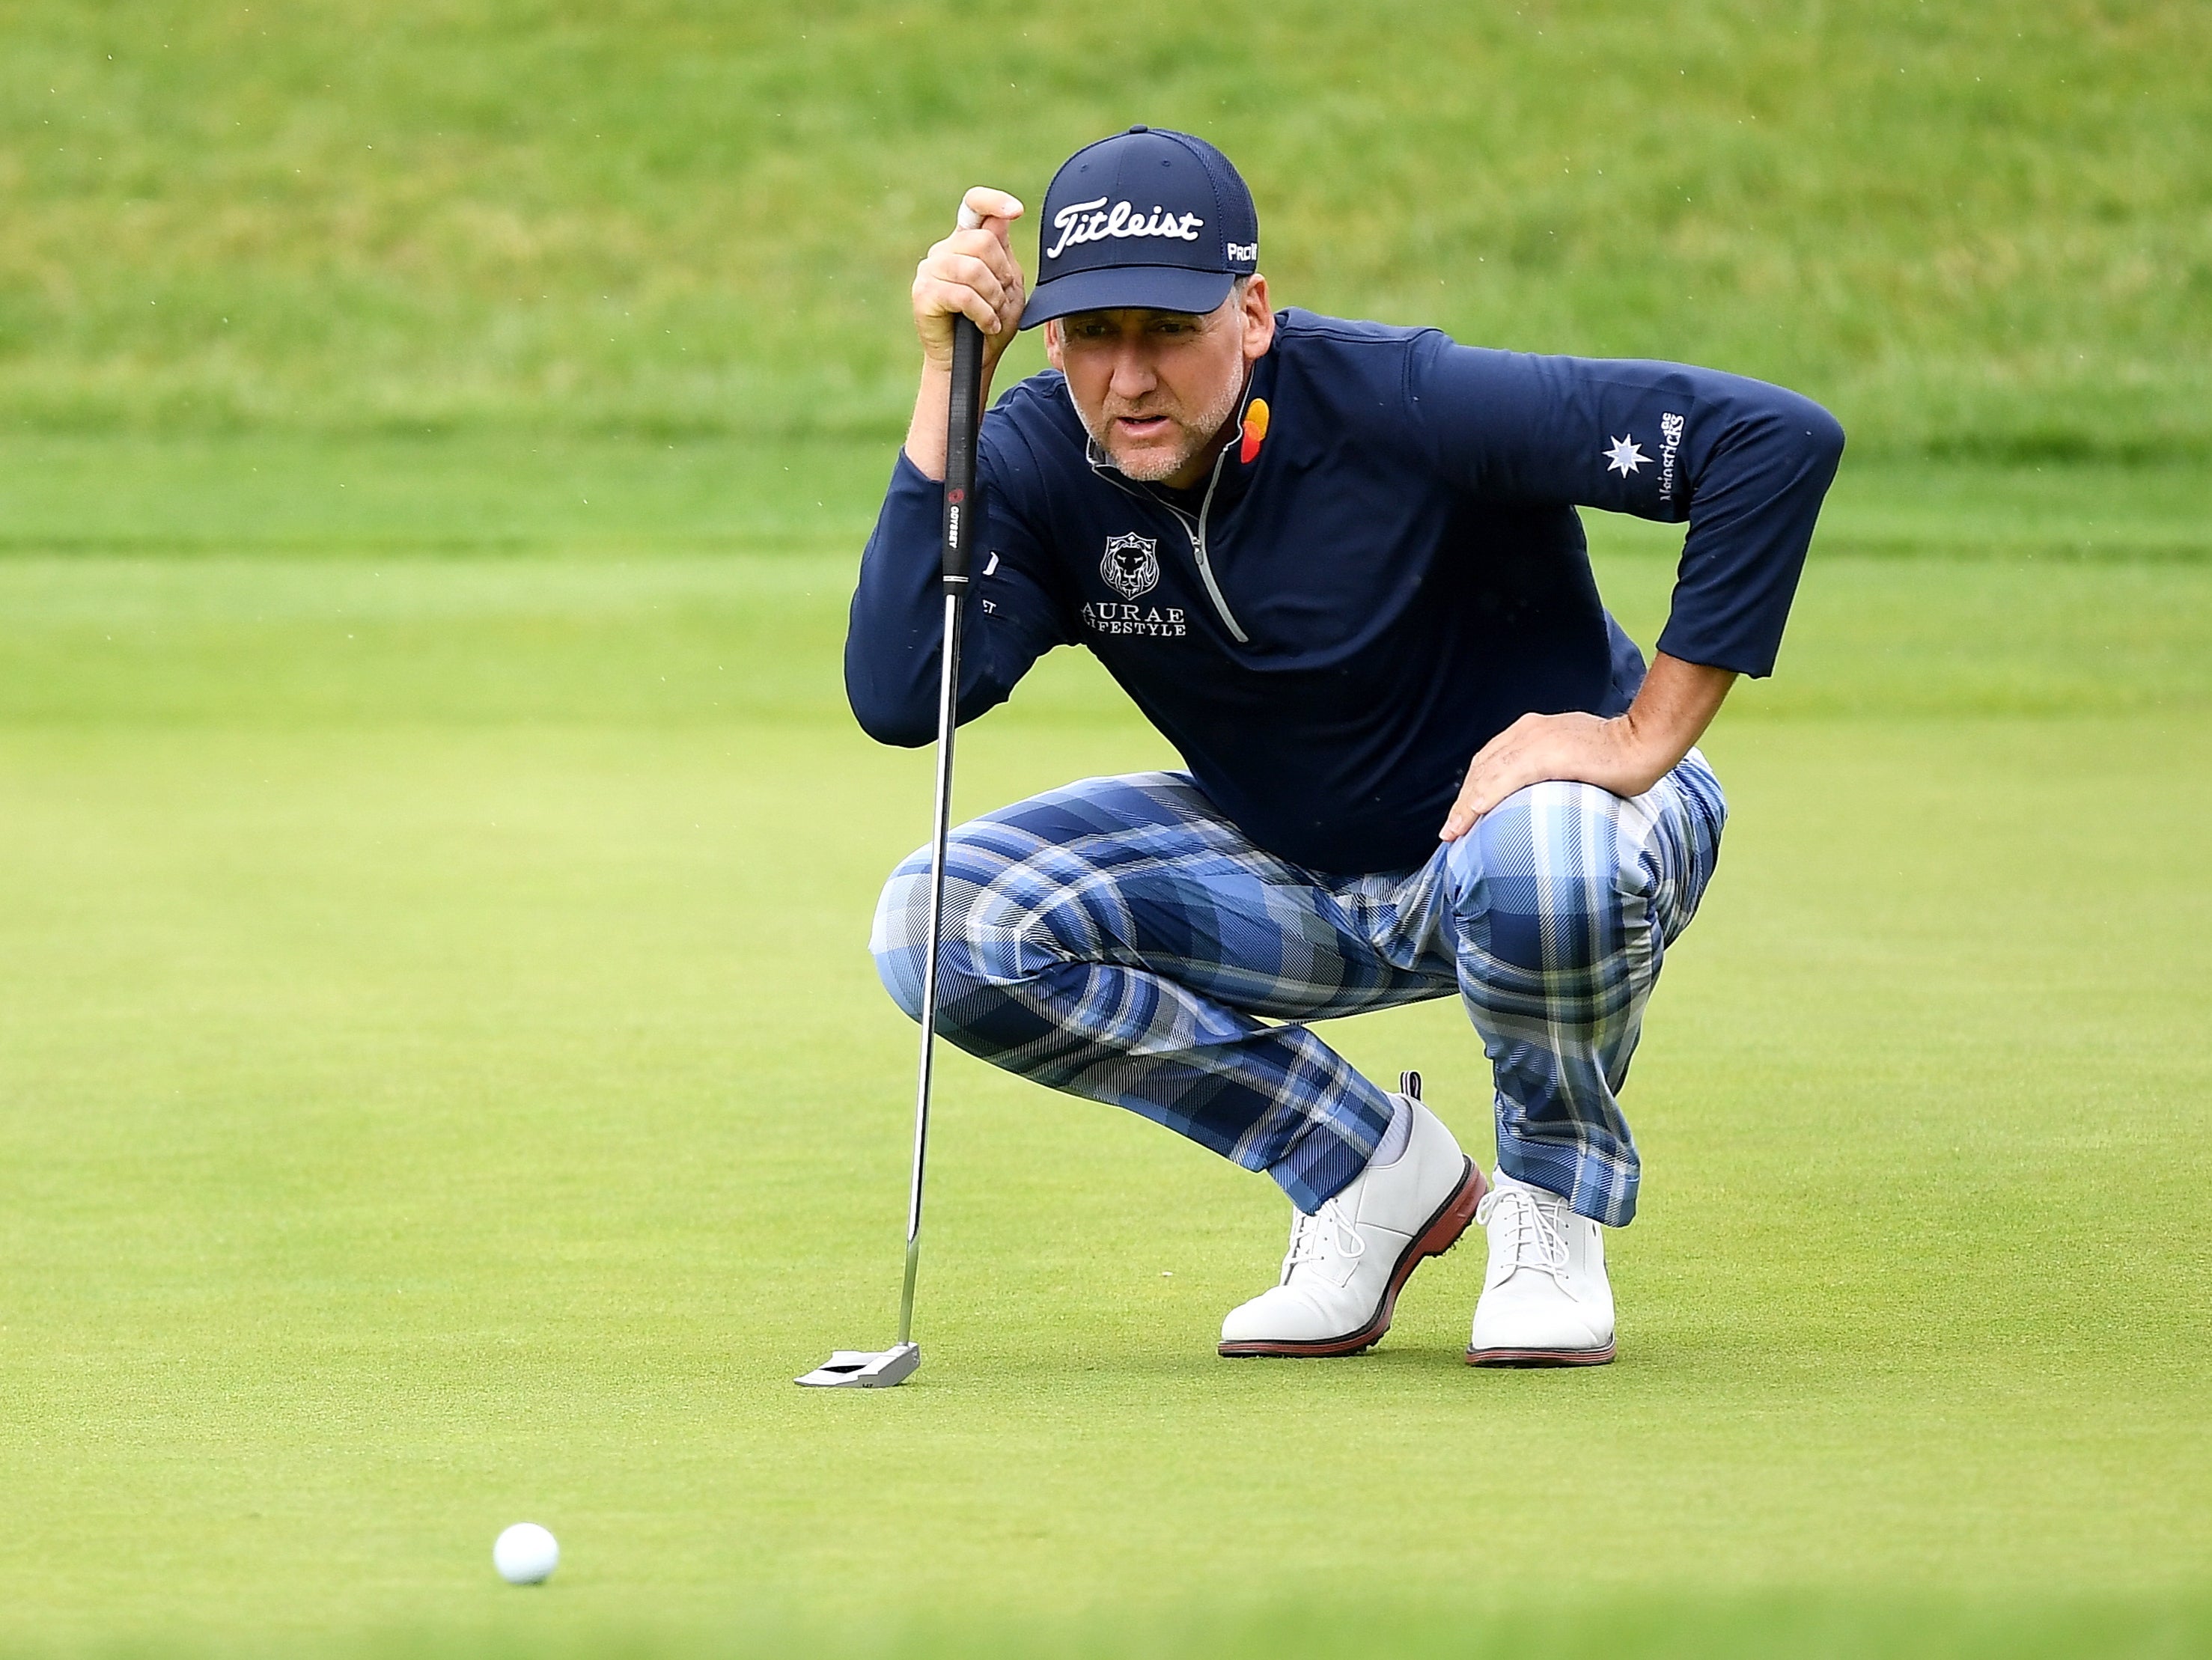 Poulter was among 17 golfers sanctioned by the Tour shortly after play got underway